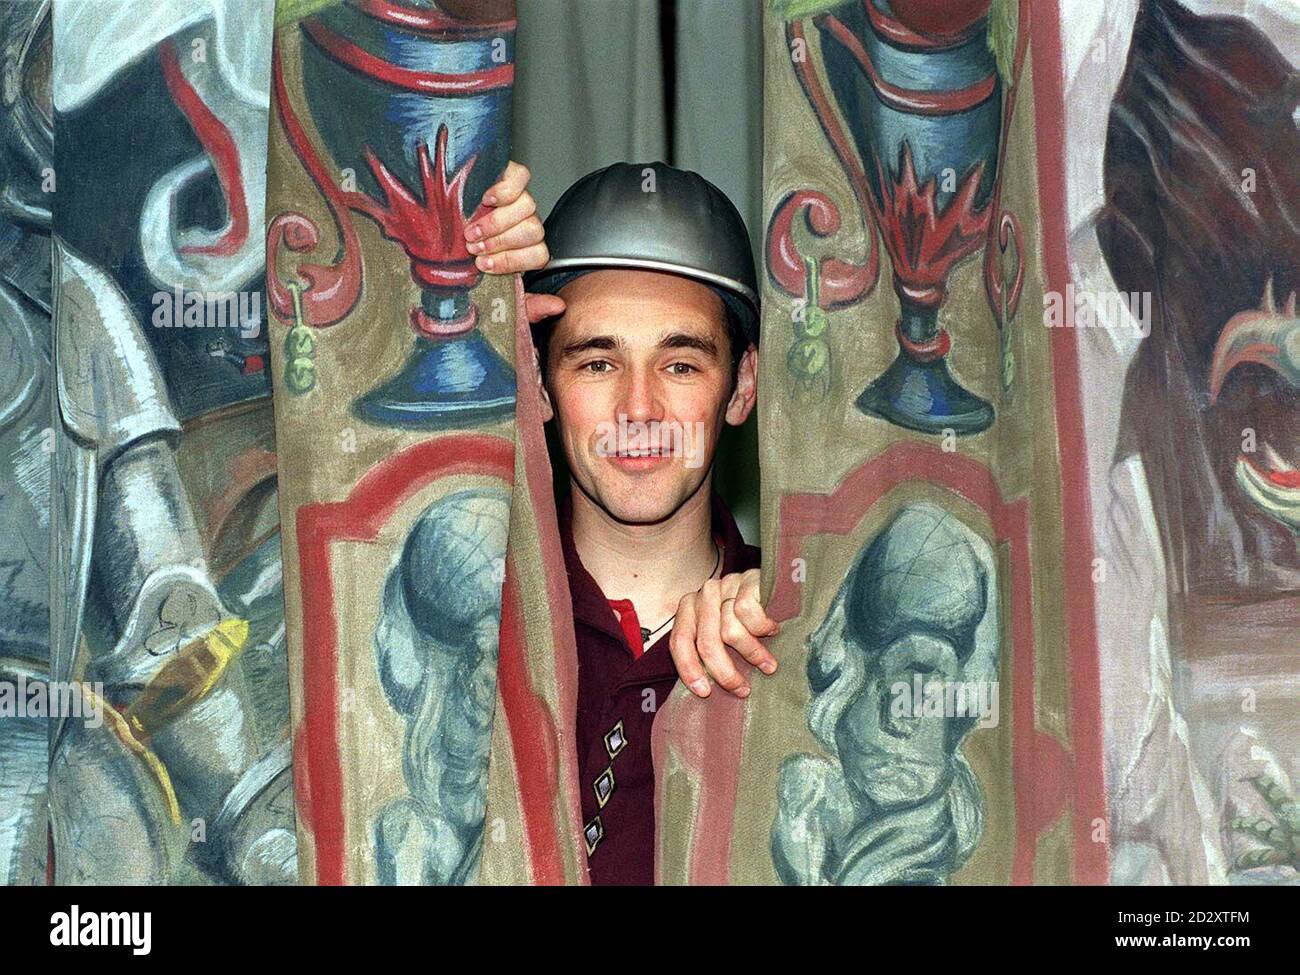 Artistic director Mark Rylance peers behind the Globe Theatre's curtain as he unveiled the newly-built playhouse stage, at the theatre today (Thursday). Built as closely as possible to original designs, the double-pillared stage has been painted in original pigments used in the 16th century.   *  20/10/99:  President Jiang Zemin visited the Globe Theatre despite Rylance writing a letter to the Foreign Office expressing concern of human rights abuse in China. Stock Photo